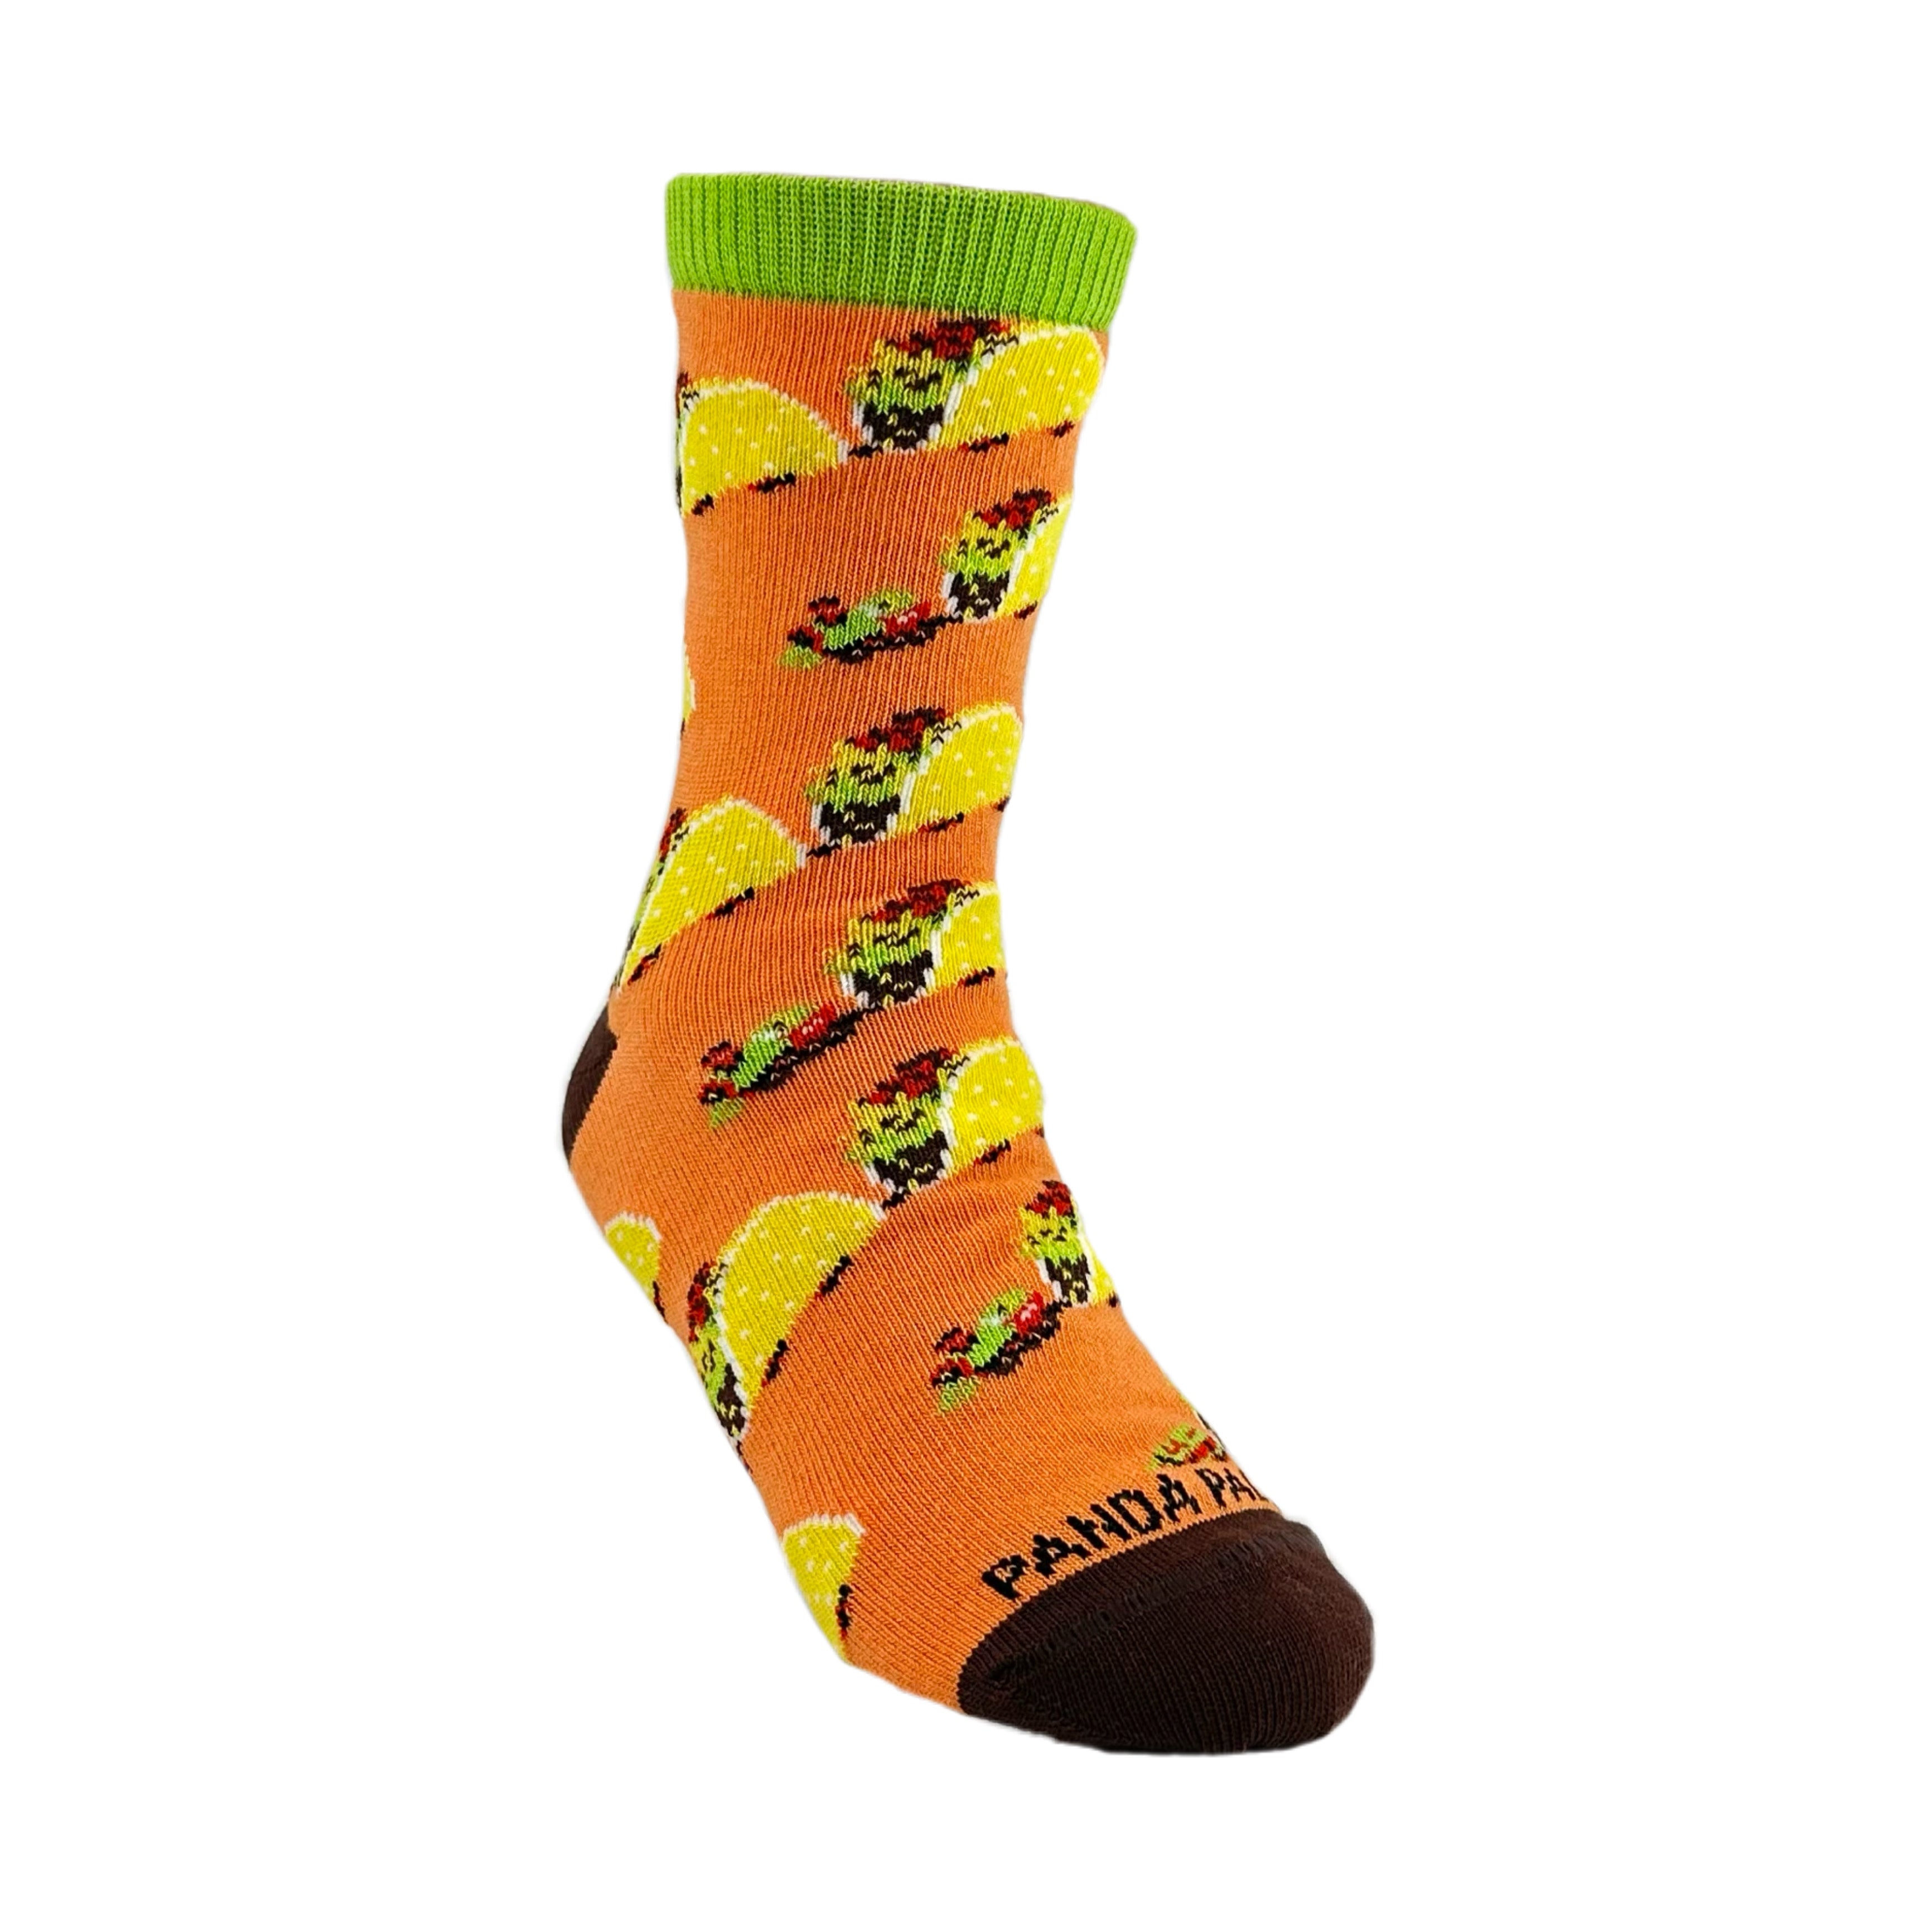 The Taco Train Socks from the Sock Panda (Ages 3-7)